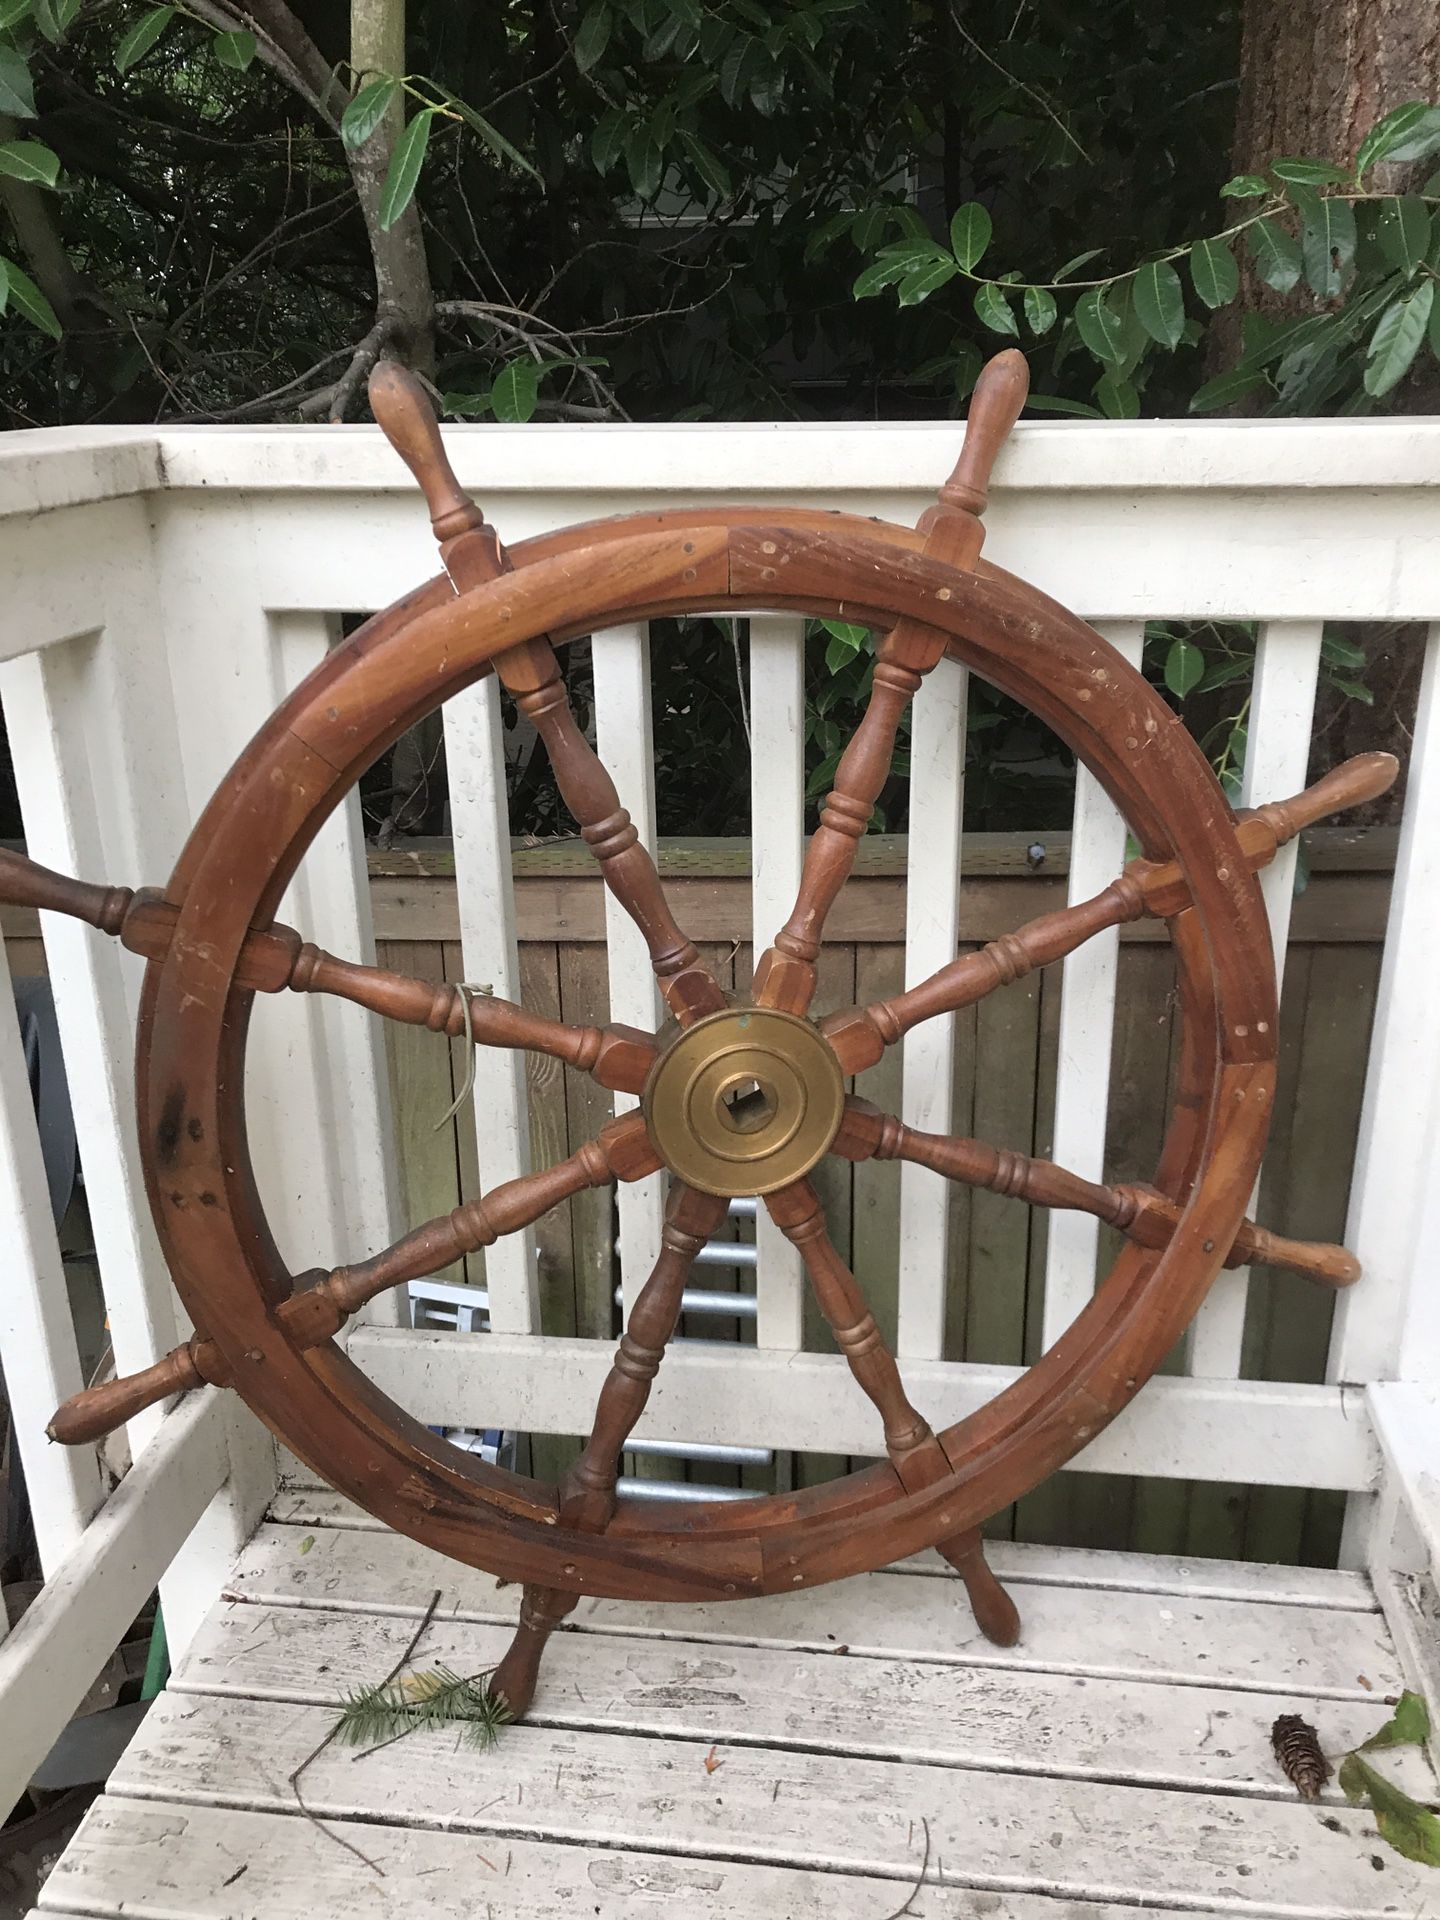 Captains wheel make offer cheap stuff if you have buck your in luck